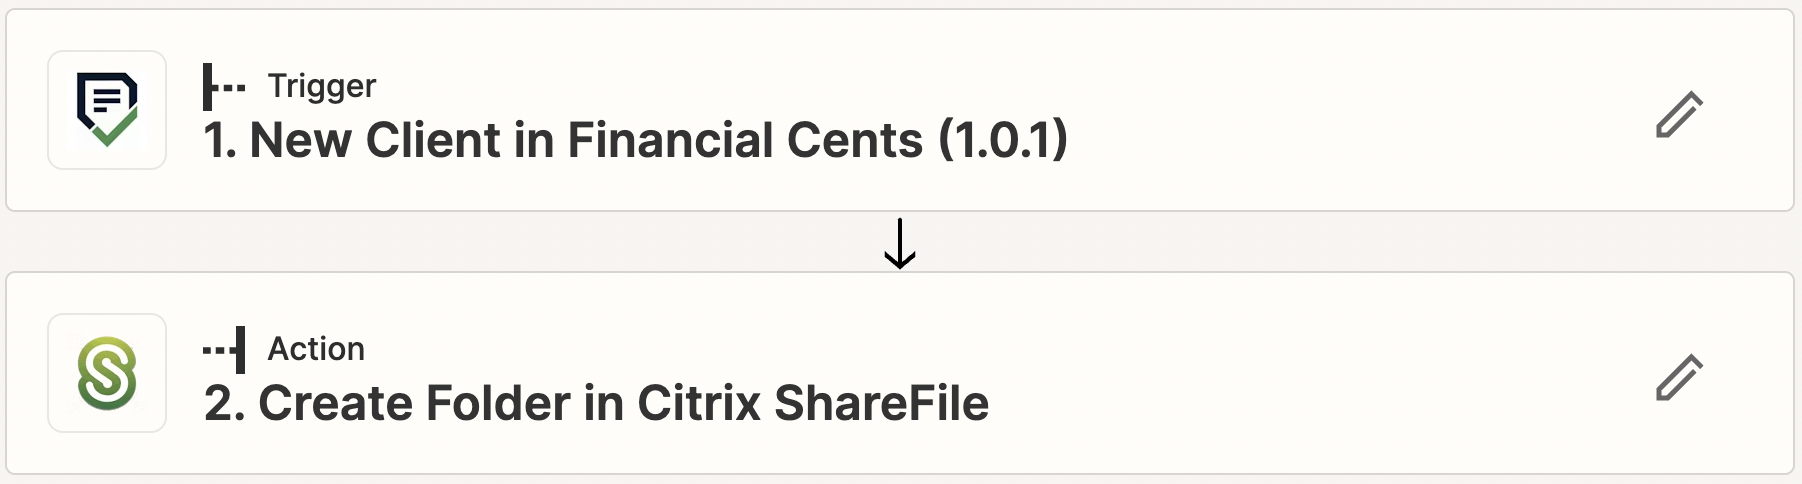 sharefile and financial cents integration through zapier step 1